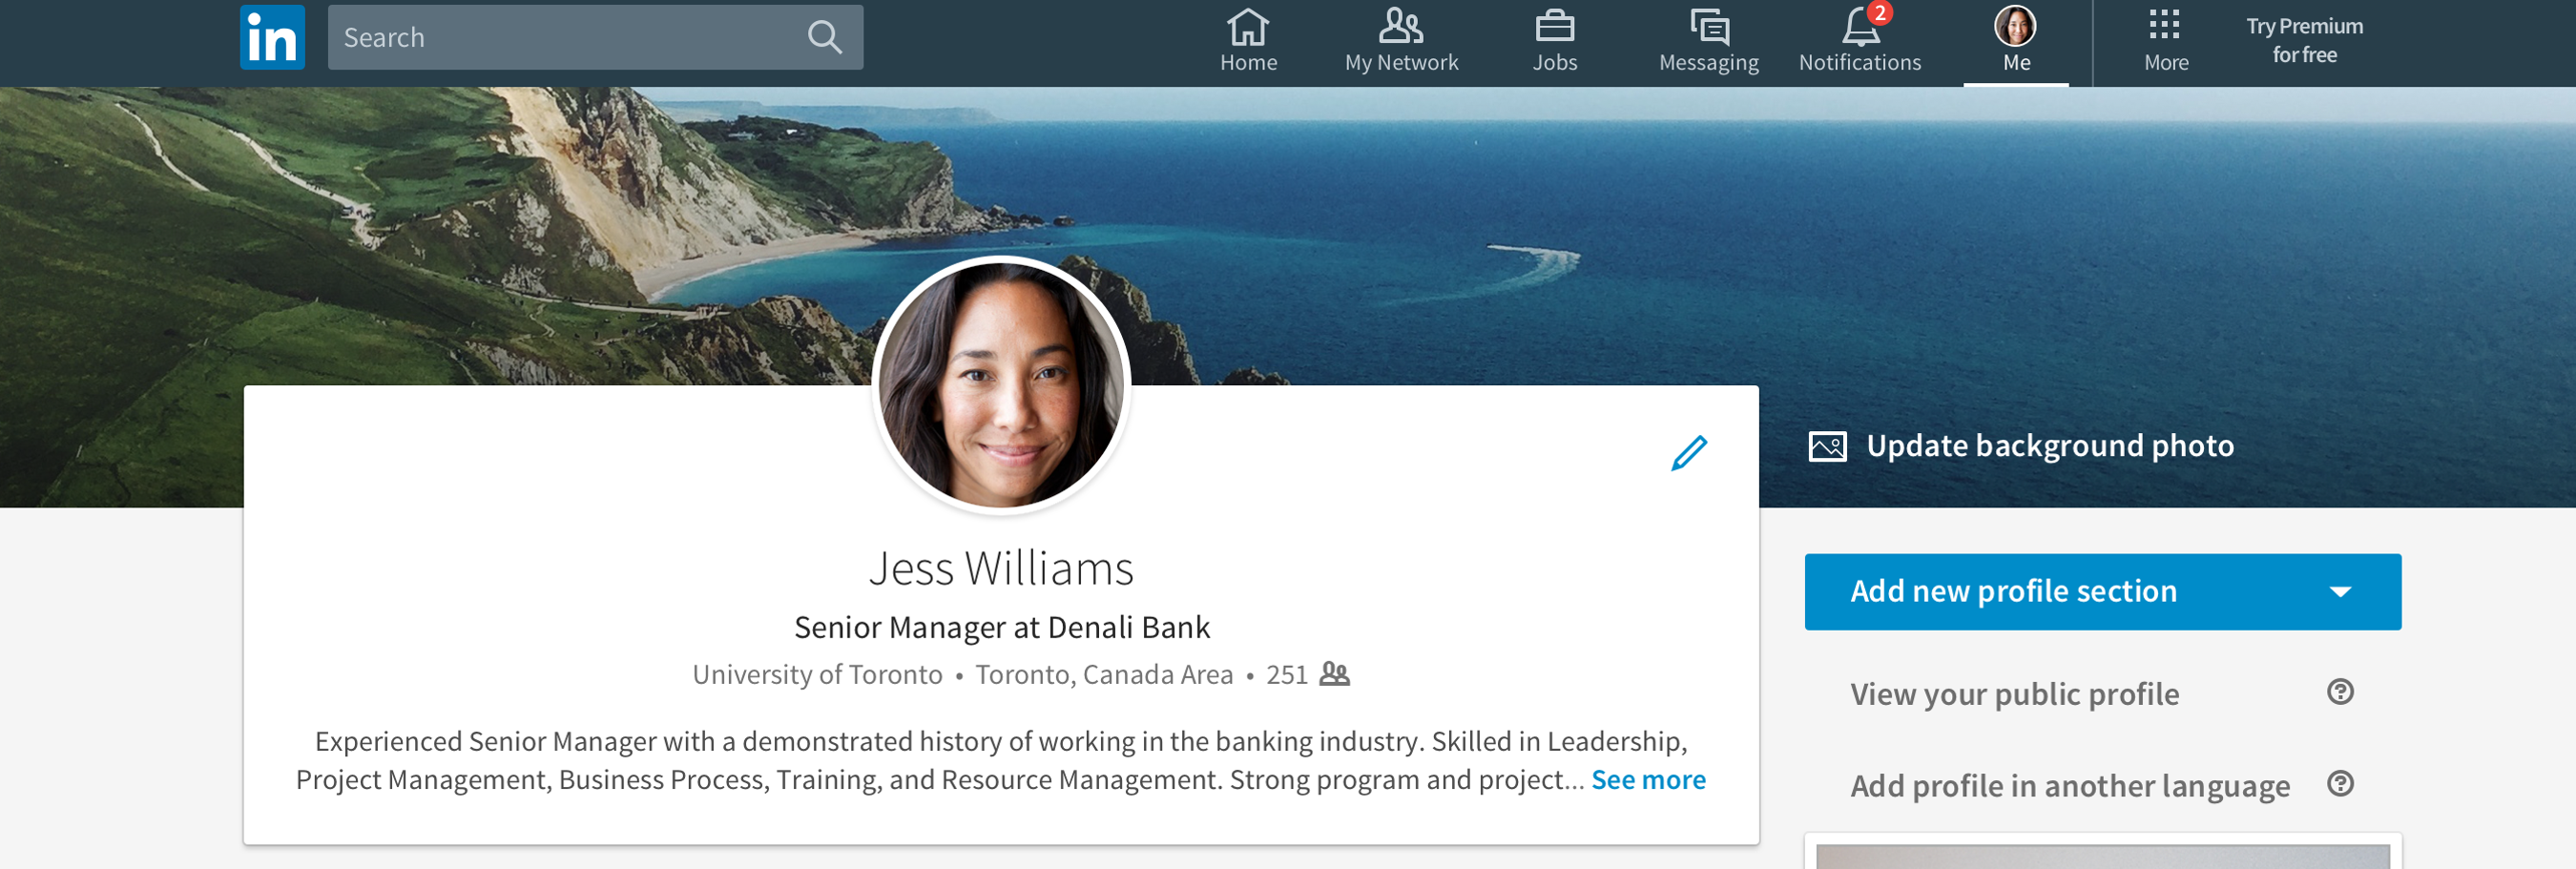 [APRIL 2017] What the Latest LinkedIn Changes Mean for Marketers and Business Owners